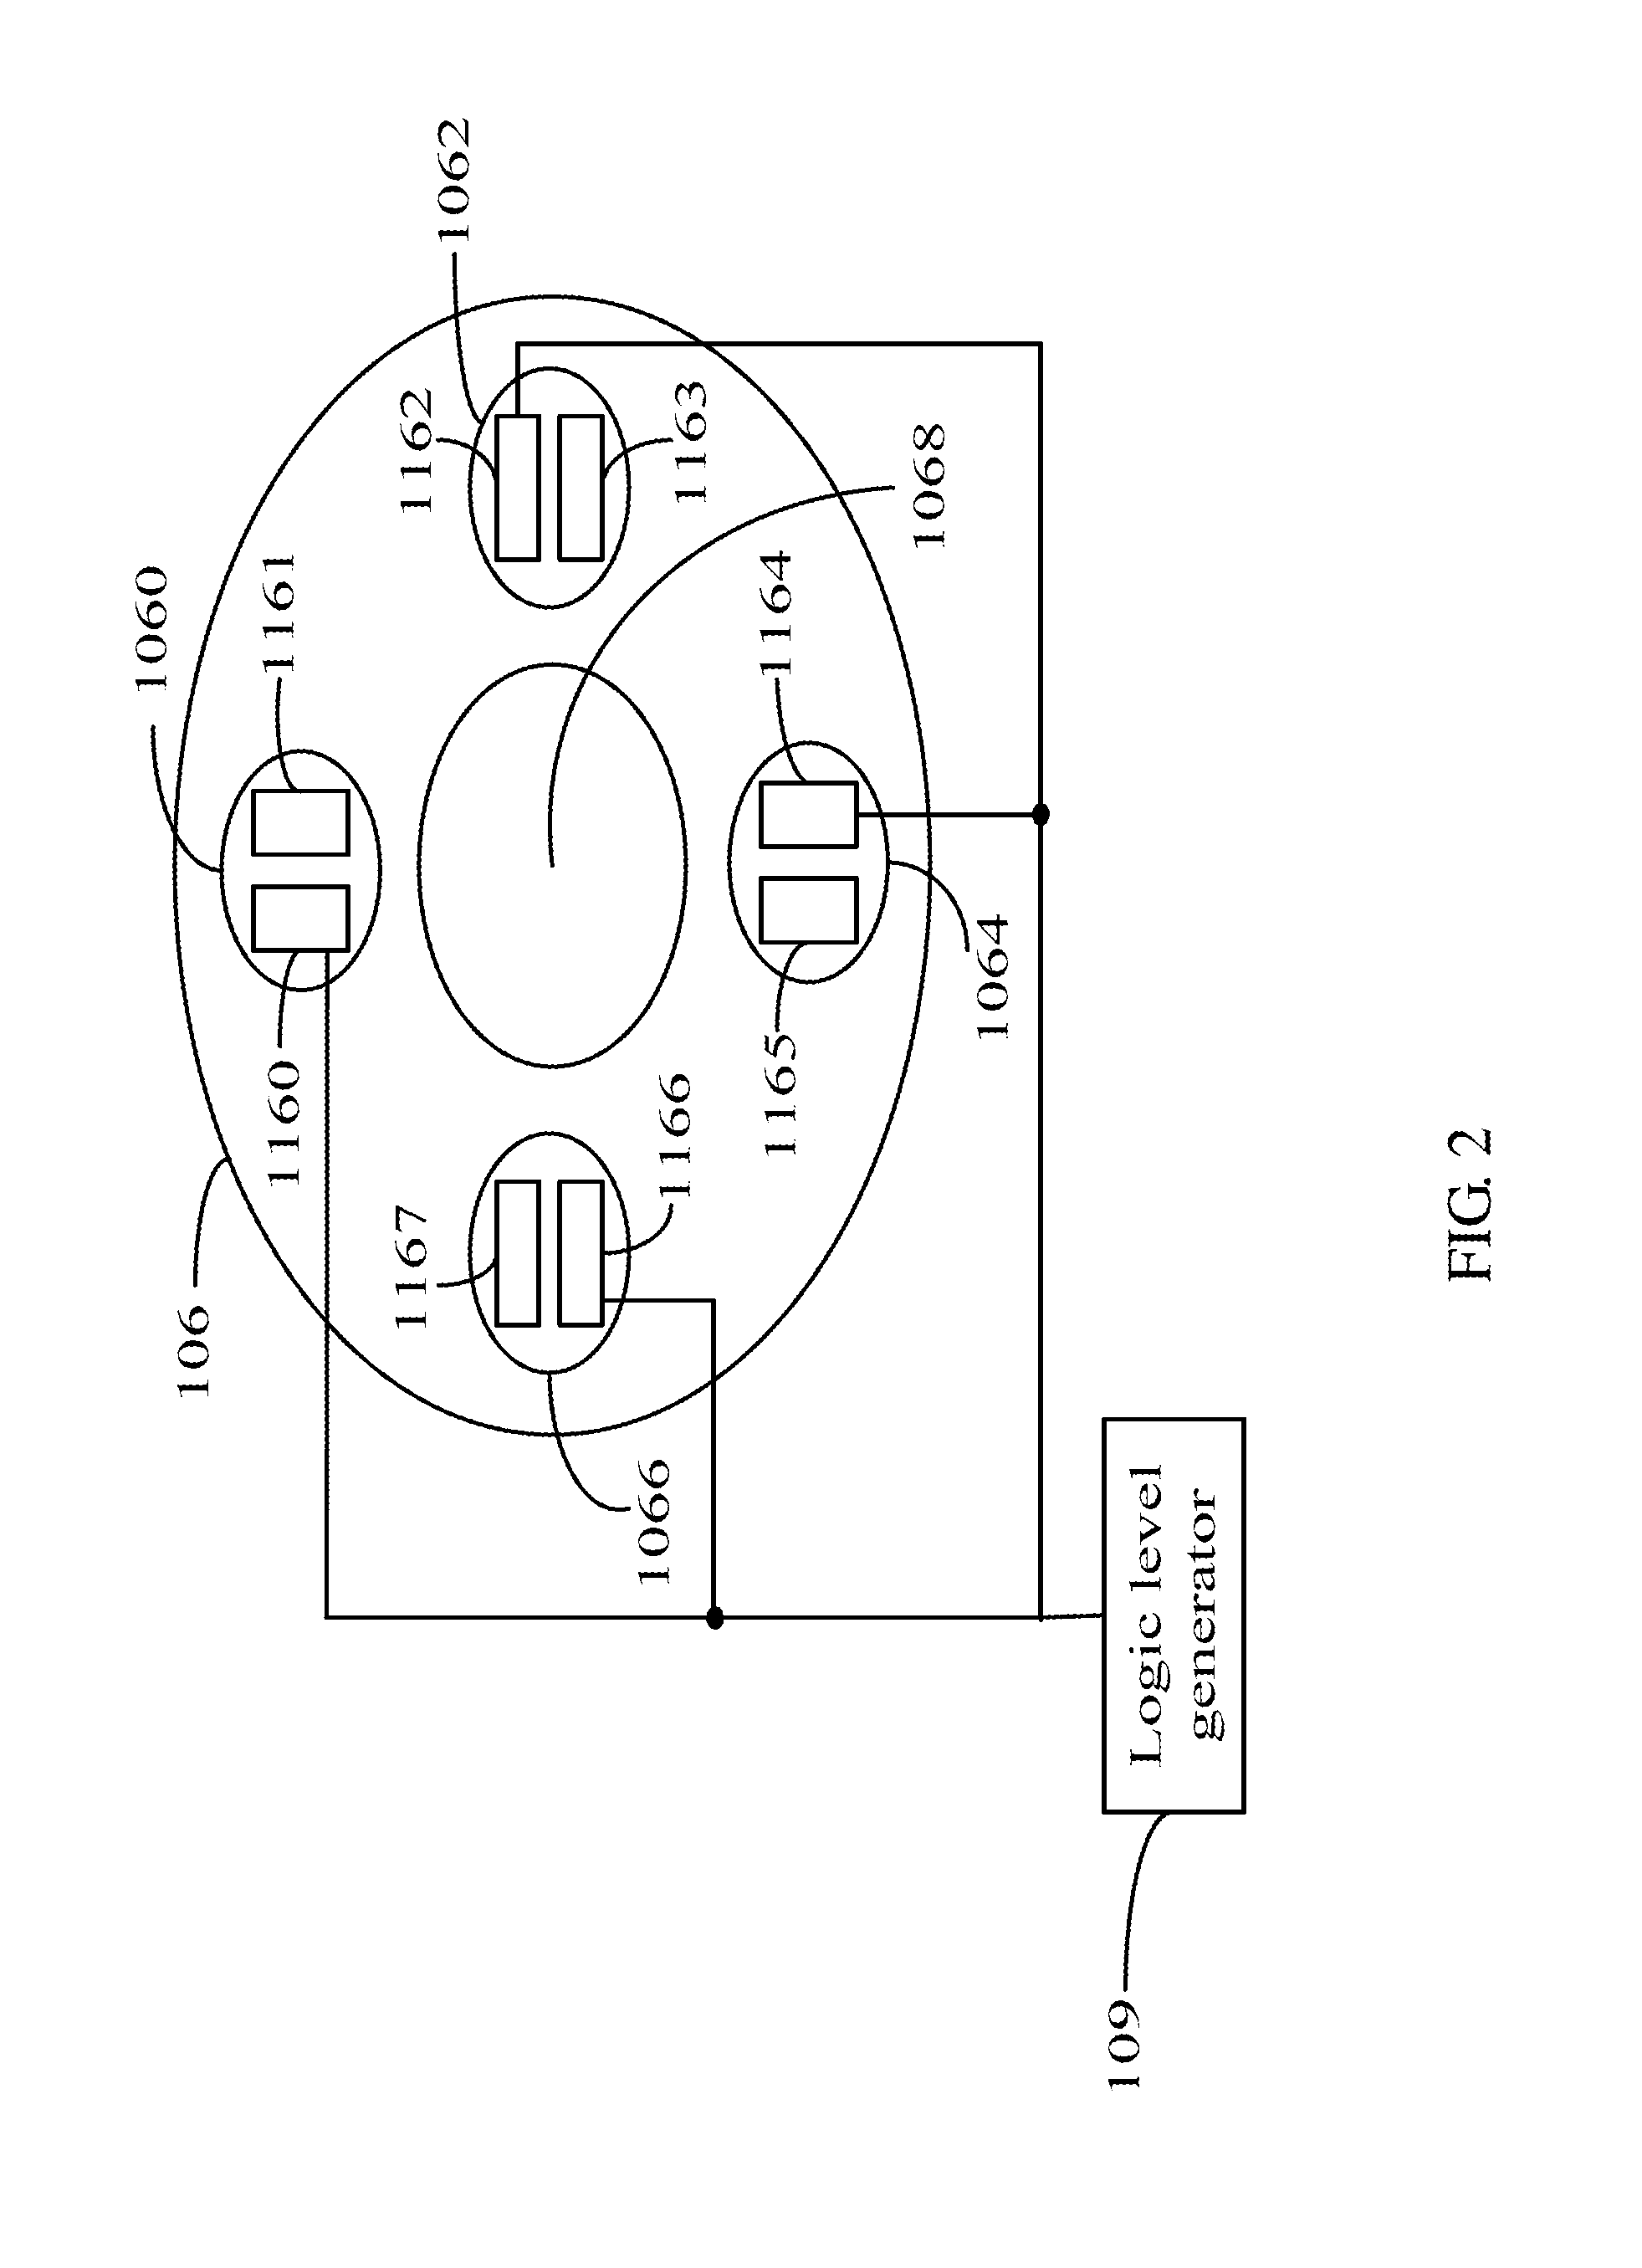 Electronic device using data theft protection